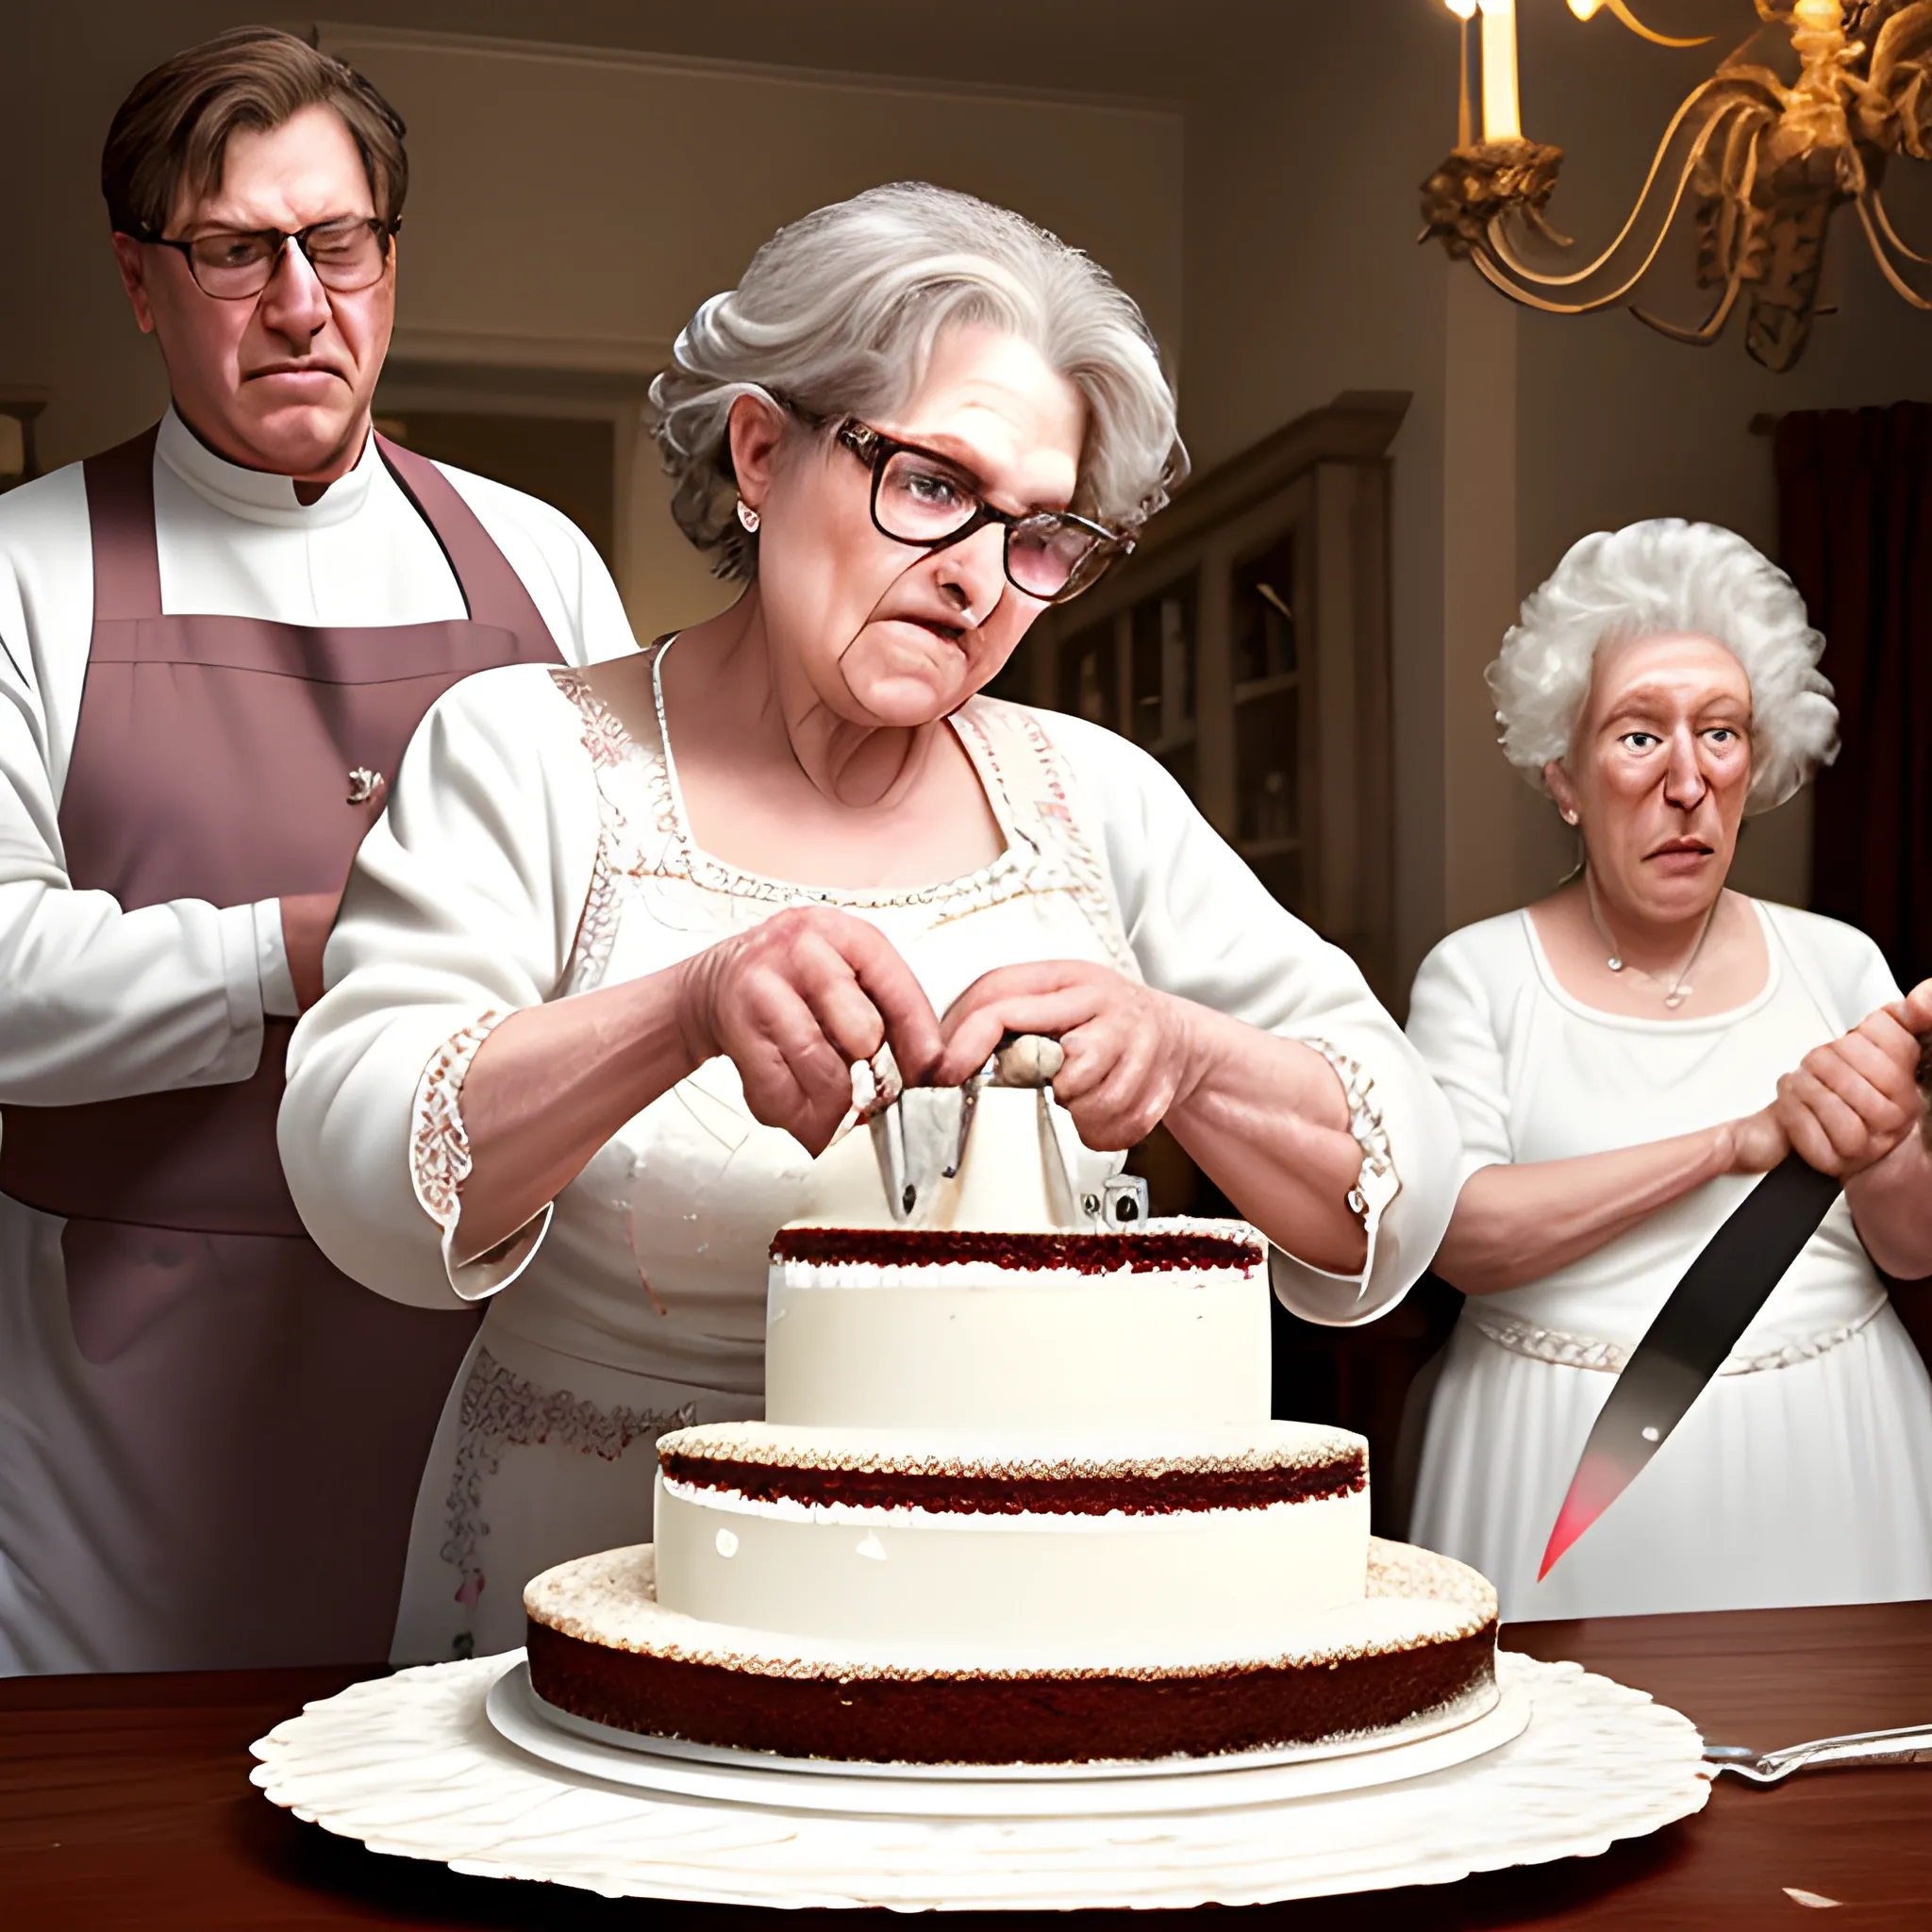 Exploding cake::15 Using a wide-angle lens, capture the dramatic moment when a grandmother with glasses in her pajamas aggressively cuts with a big knife a wedding cake::10 The lighting is white. The cake is ornamental elaborated in multiple floors::3 The grandmother's hands grip the knife tightly, and her expression is one of determination mixed with anger and fury::3 The cake explodes into crumbs and chaotic pieces::7 as if the grandmother is taking out her frustrations on the cake::3 the background shows the catering of the wedding in white and pure colors::4 candles, kitchen, fire::-10 --ar 9:16 --v 5